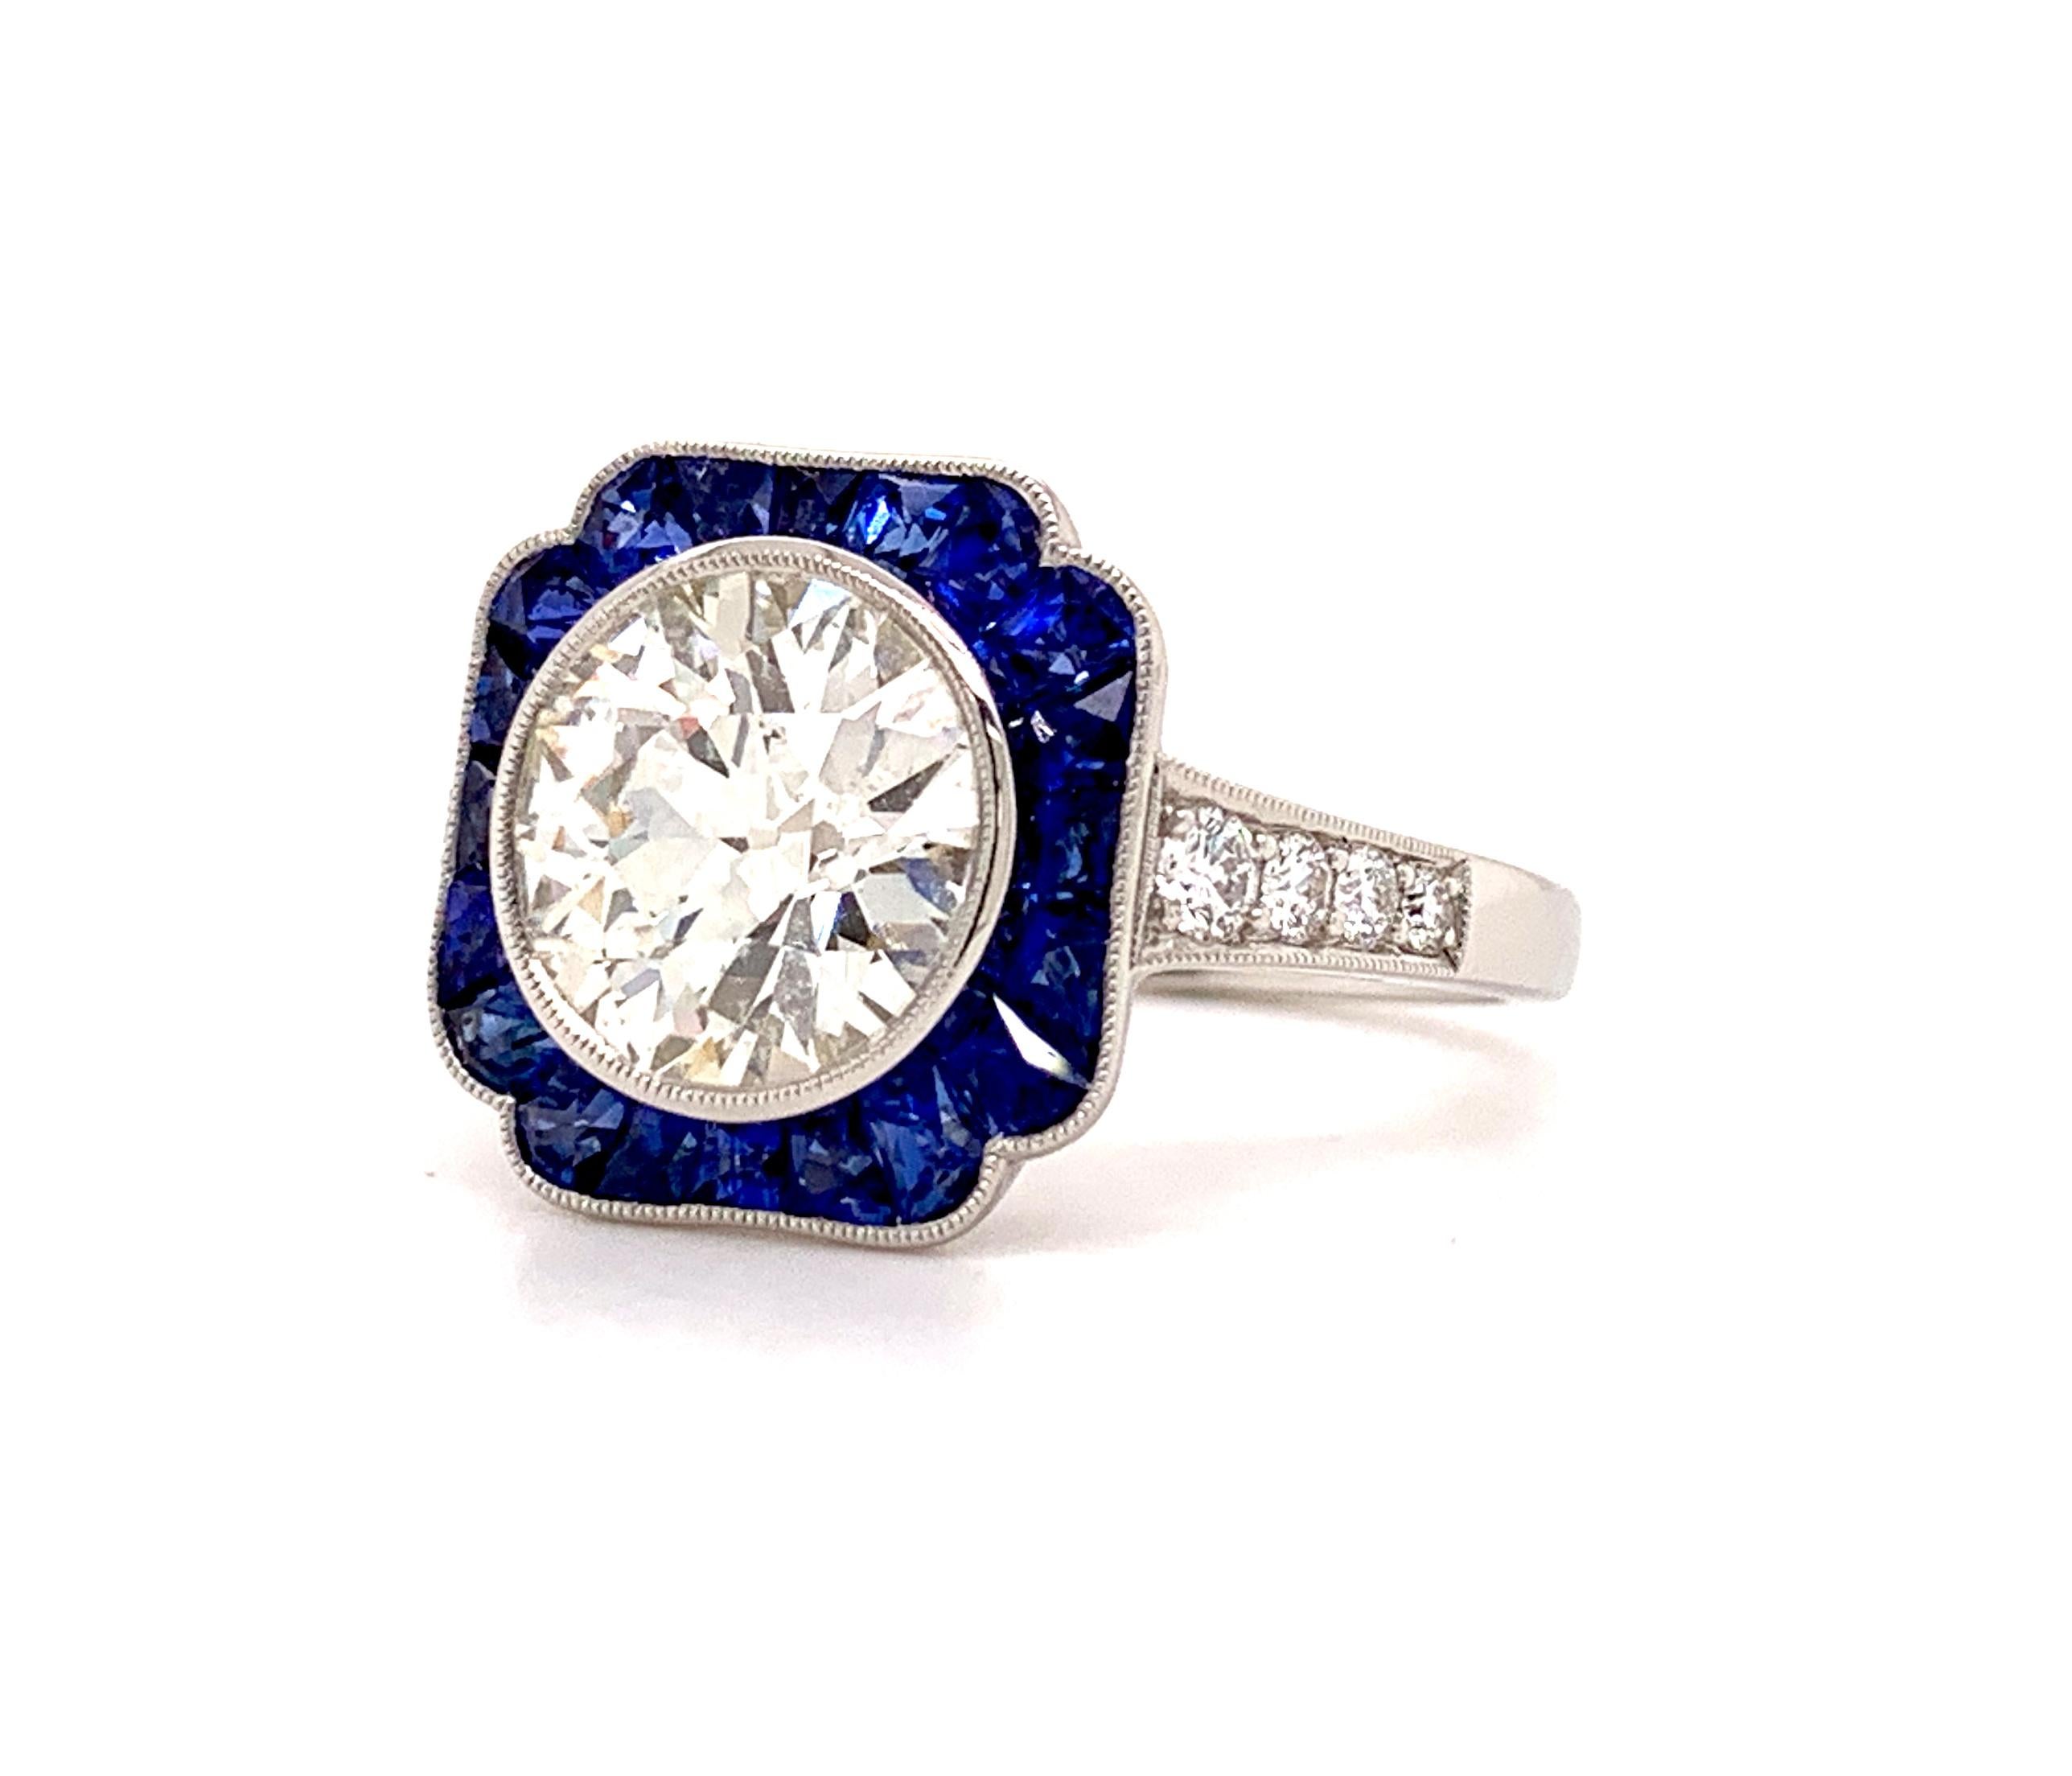 Sophia D GIA Certified 2.53 Carat Center Diamond and Blue Sapphire Art Deco Ring In New Condition For Sale In New York, NY